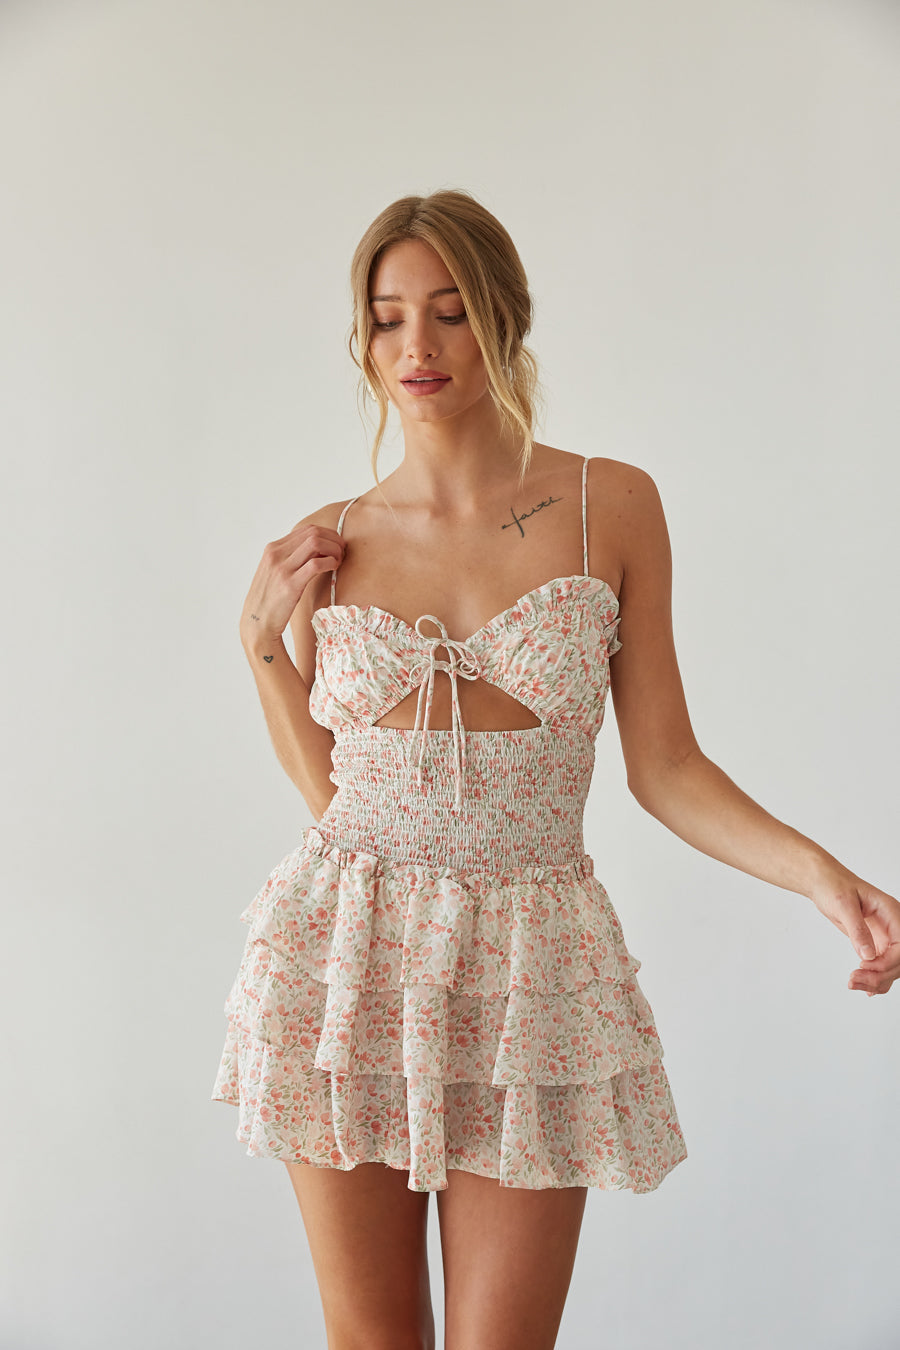 Trendy Rompers For All Occasions: Cute Going Out Rompers ...